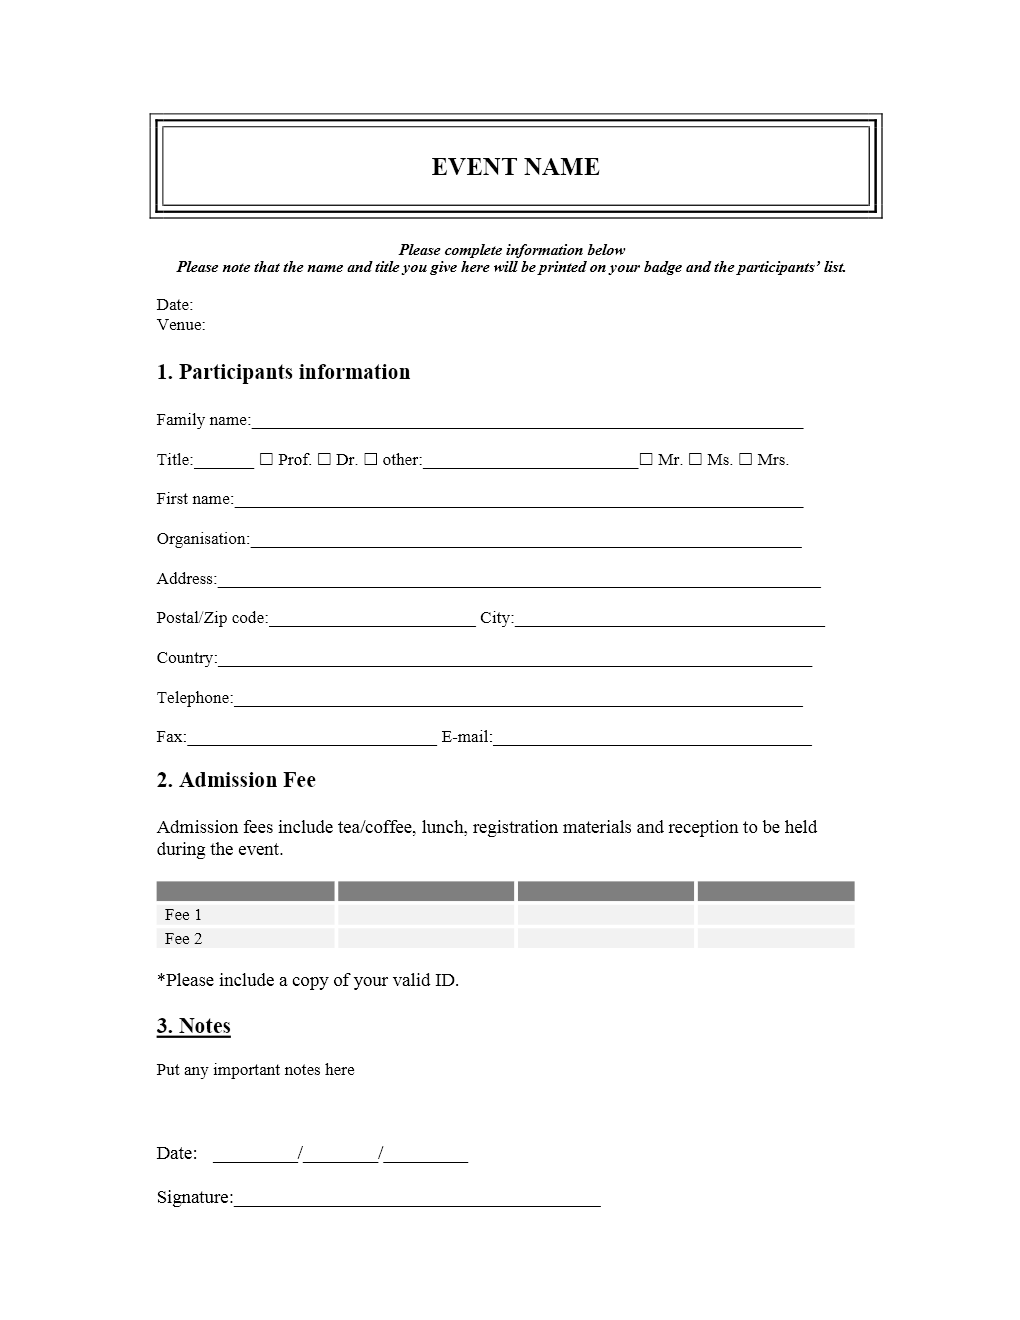 free registration forms template   Tier.brianhenry.co